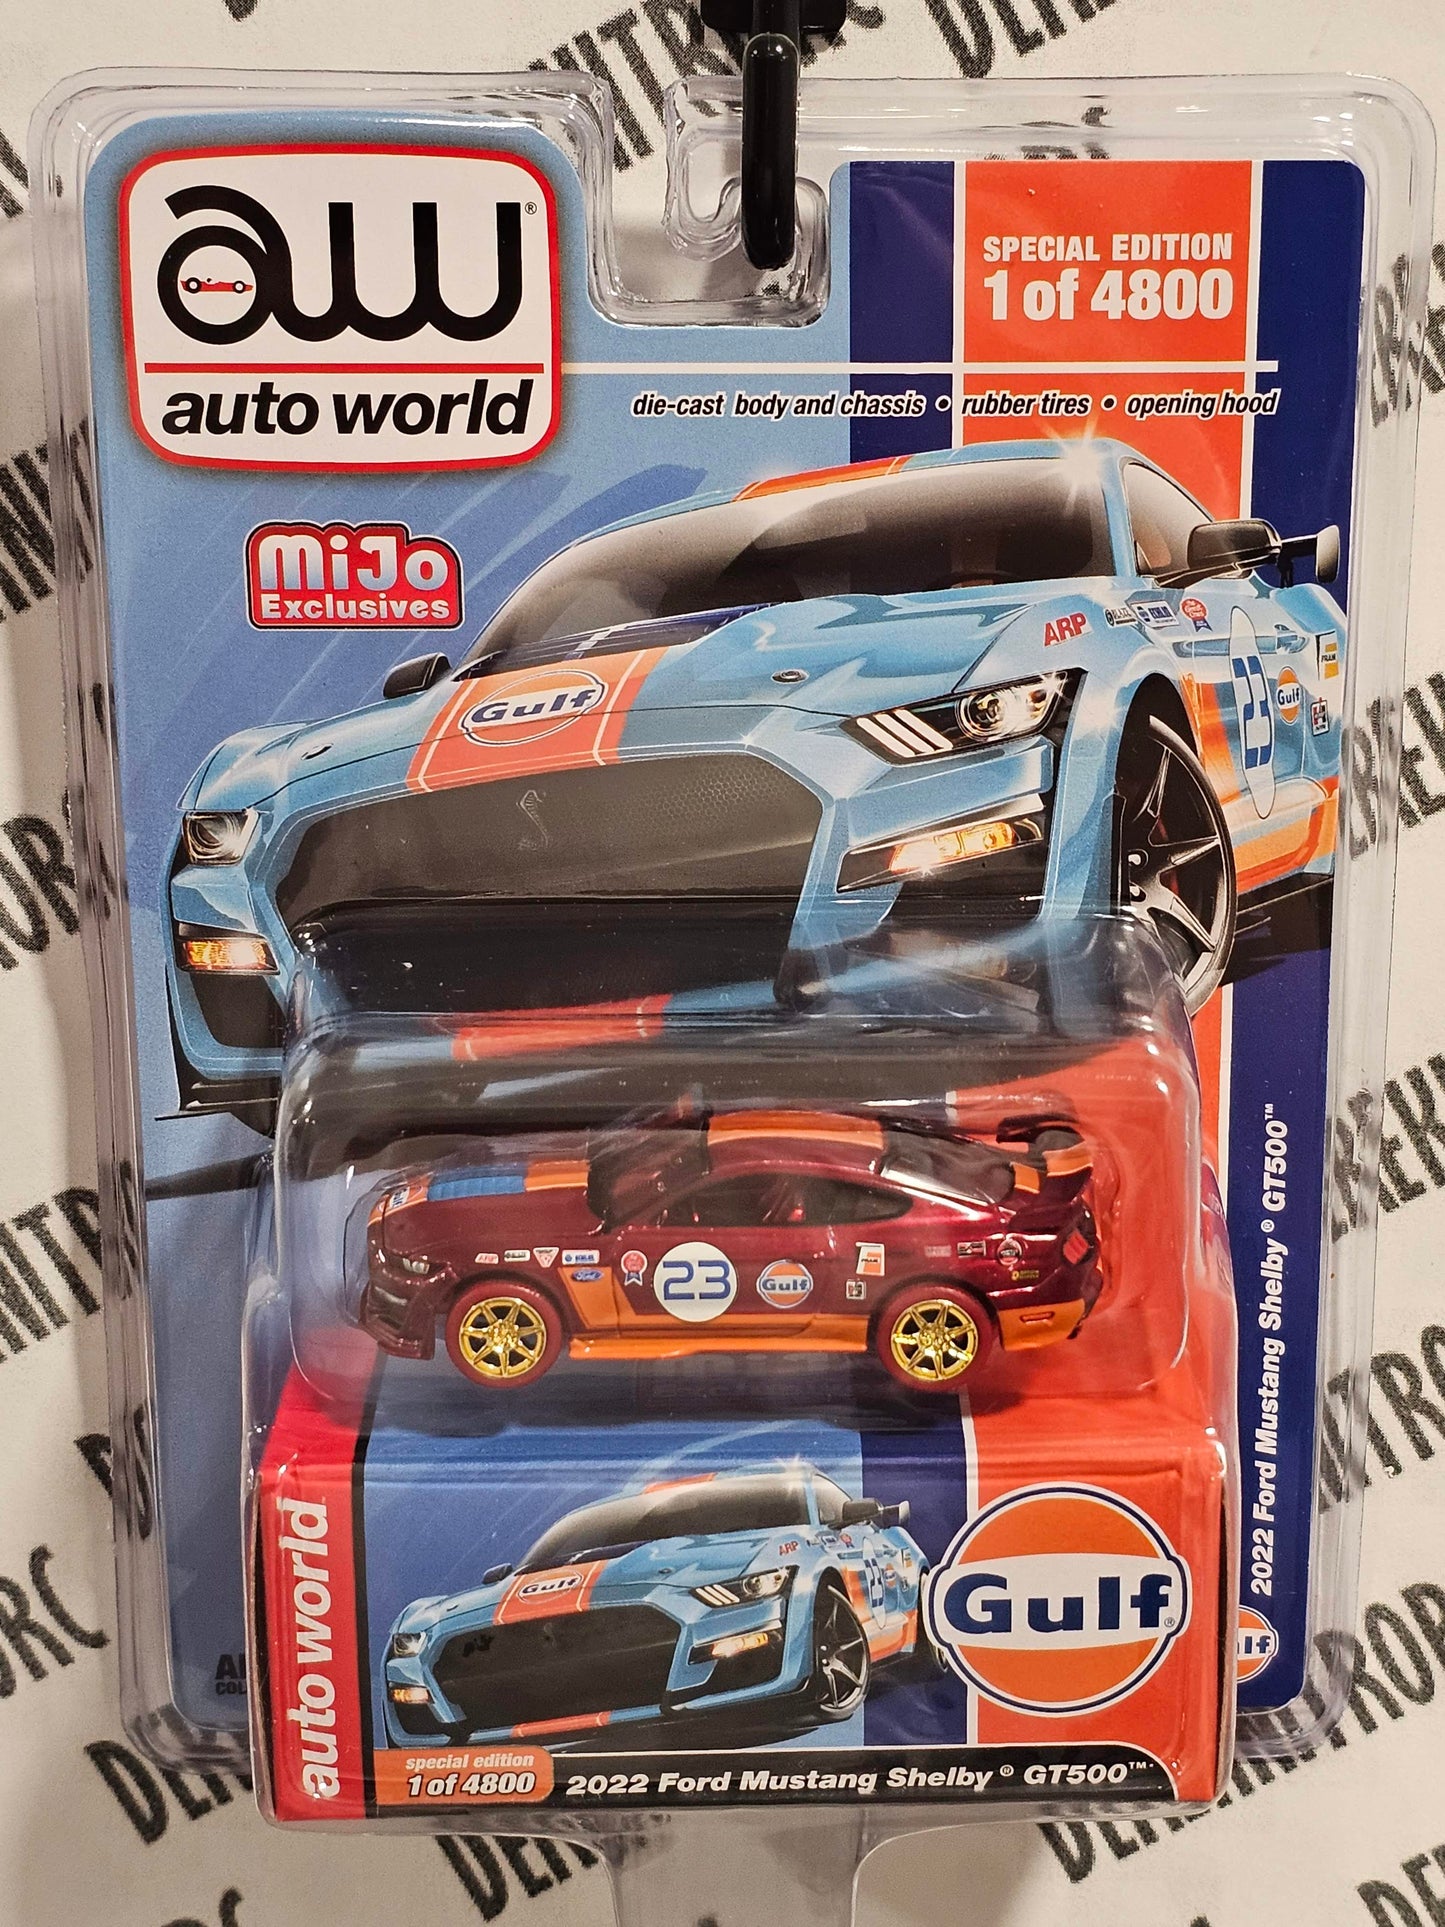 Auto World Ultra Red Chase 2022 Ford Mustang Shelby GT500 GULF Racing Limited